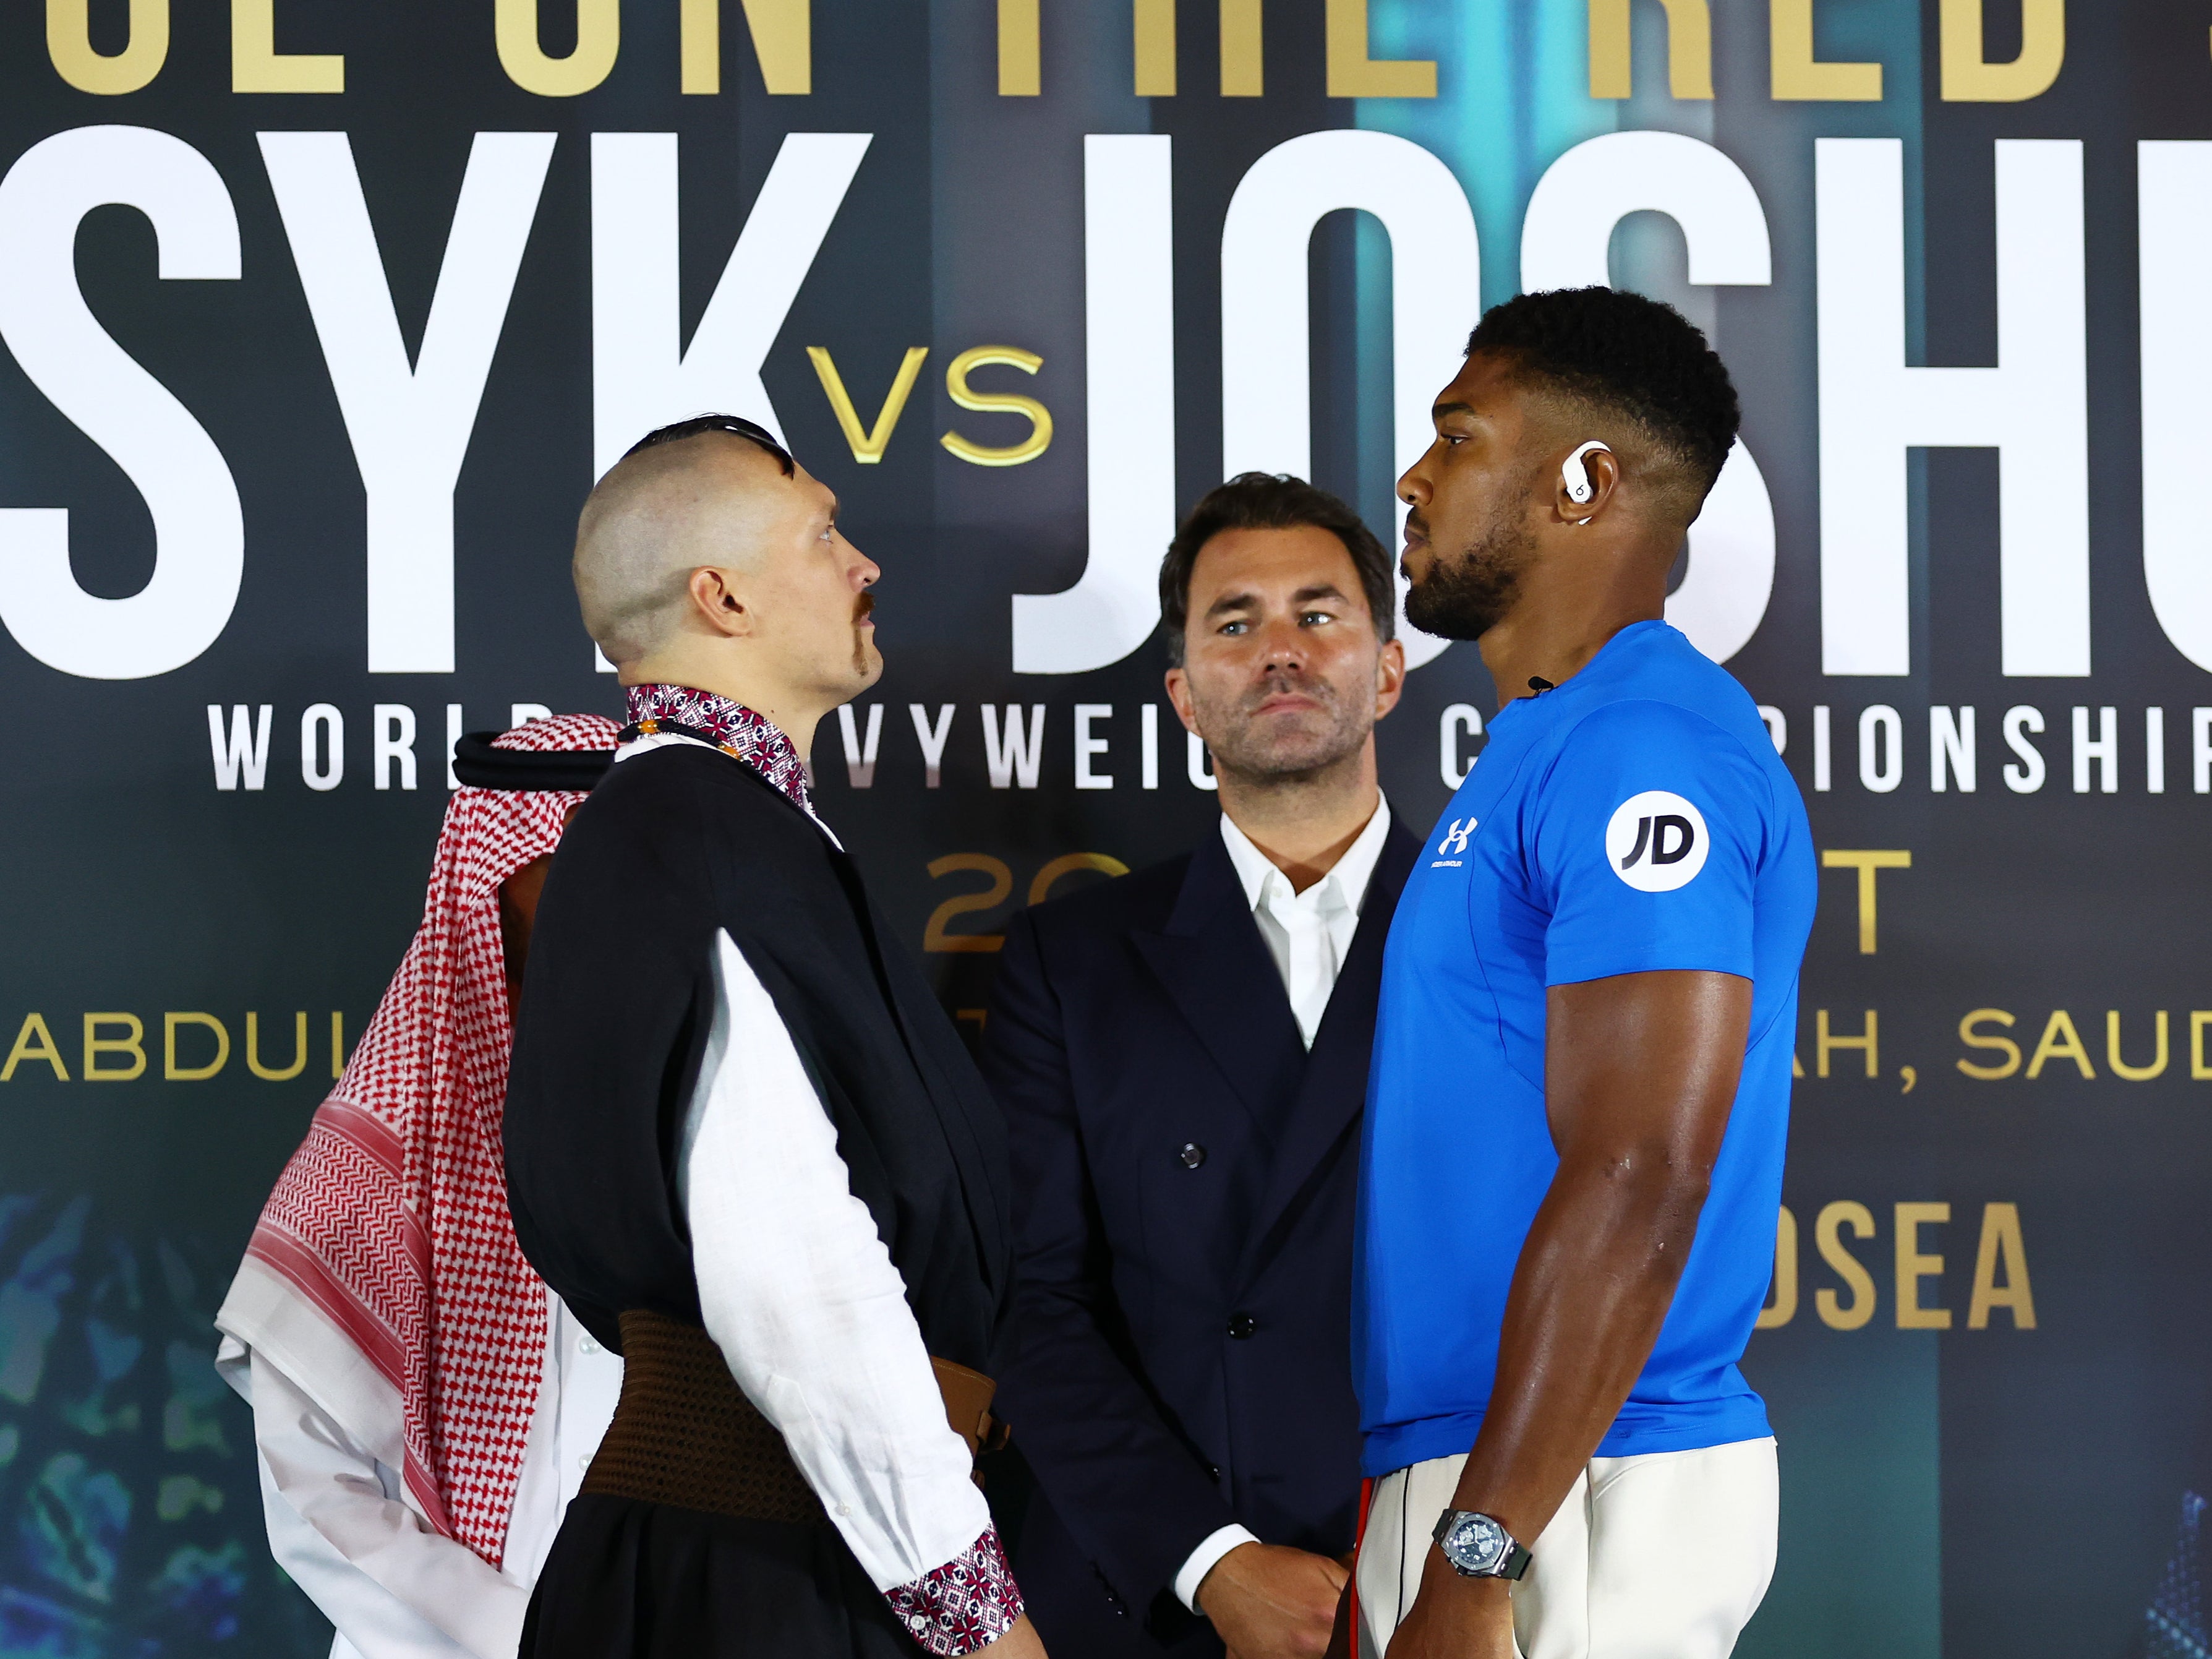 Joshua vs Usyk press conference LIVE Latest updates for Jeddah rematch The Independent